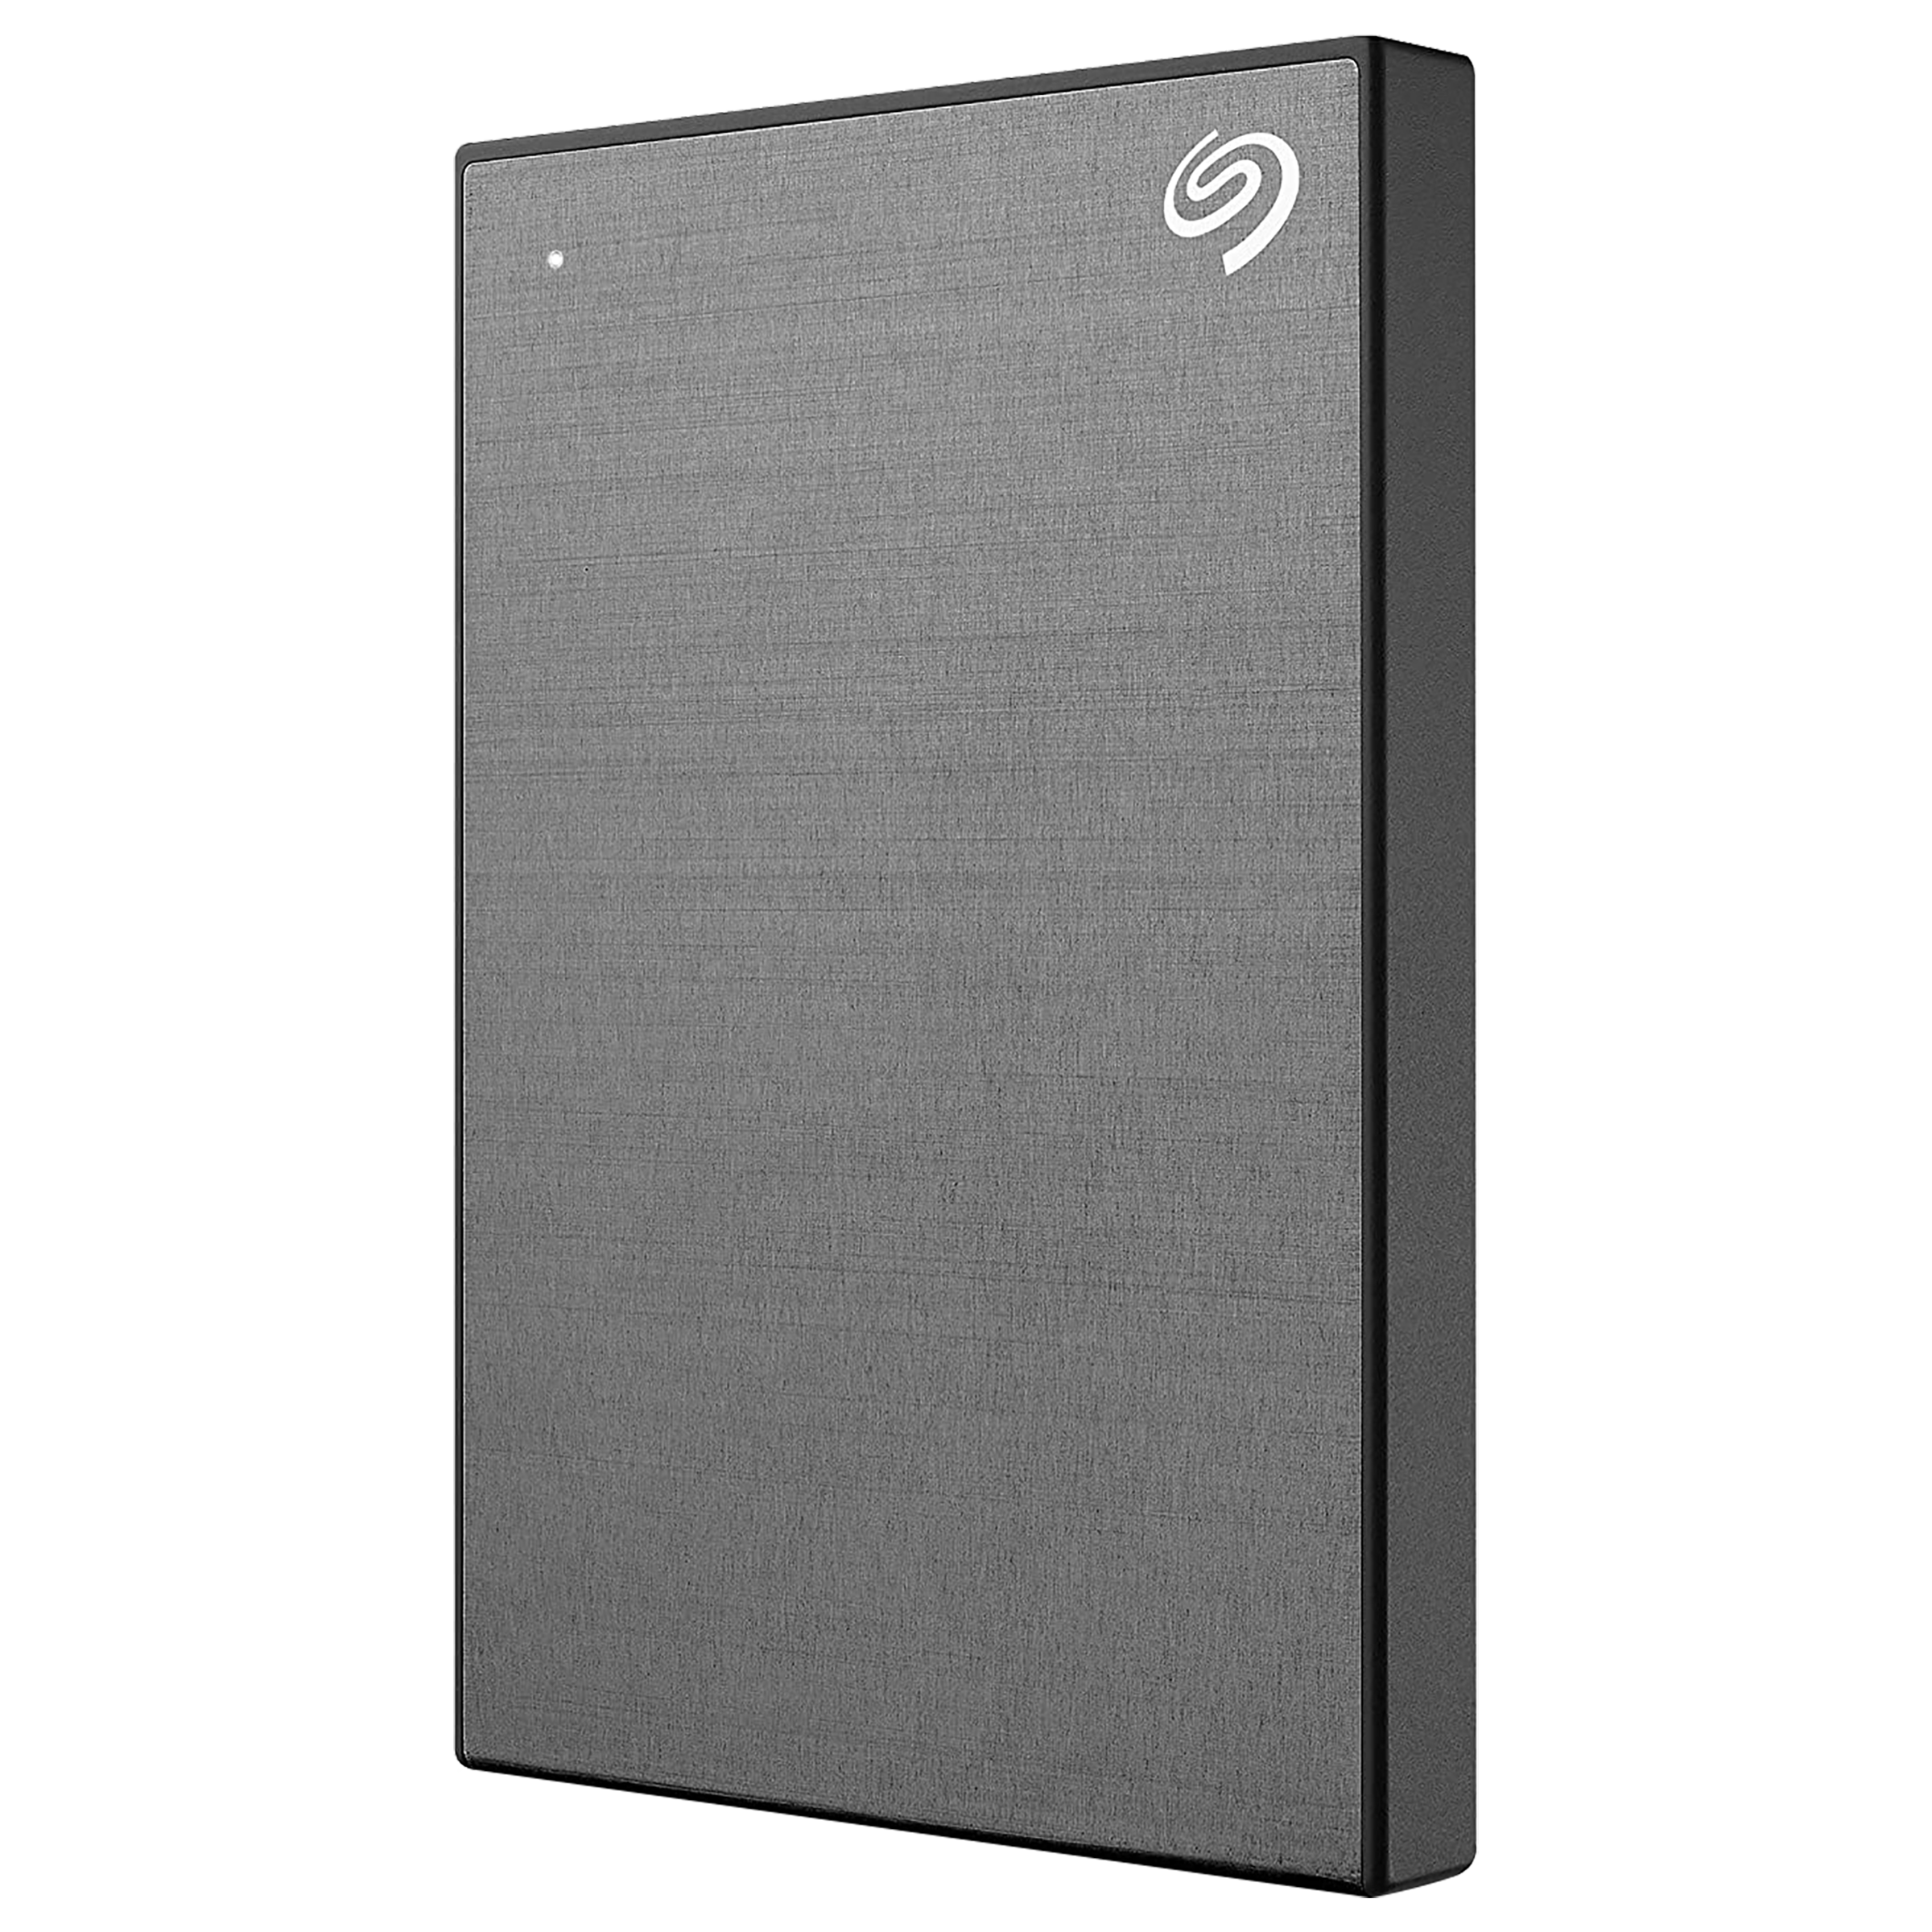 Seagate One Touch 1TB USB 3.0 Hard Disk Drive (Password Activated Hardware Encryption, STKY1000404, Grey)_1